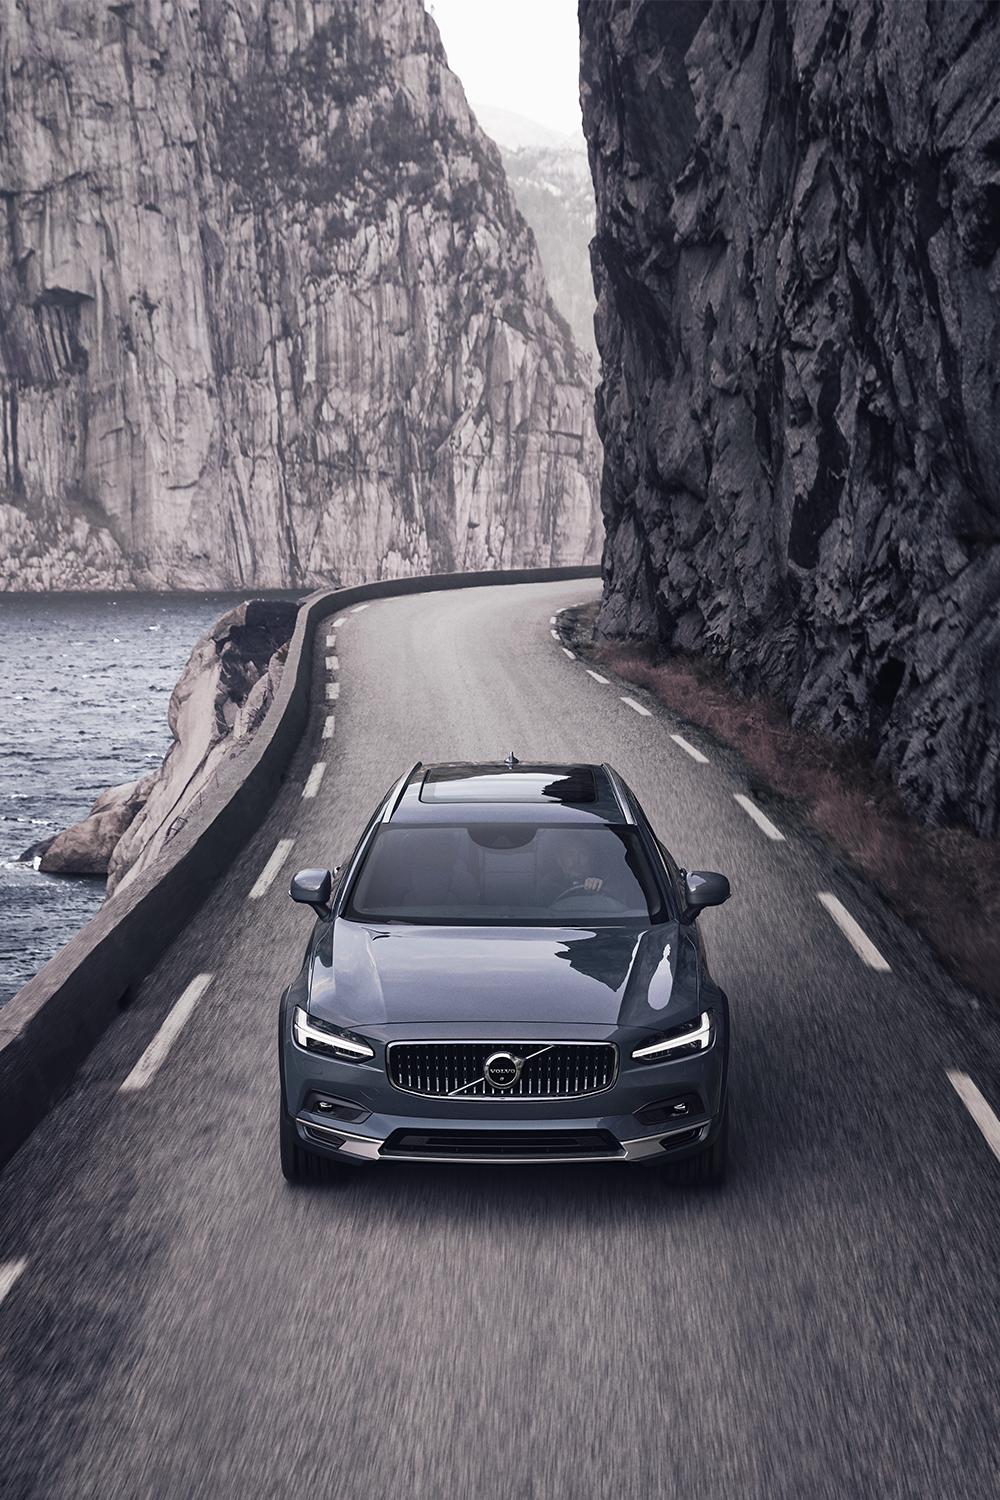 Volvo Wallpapers